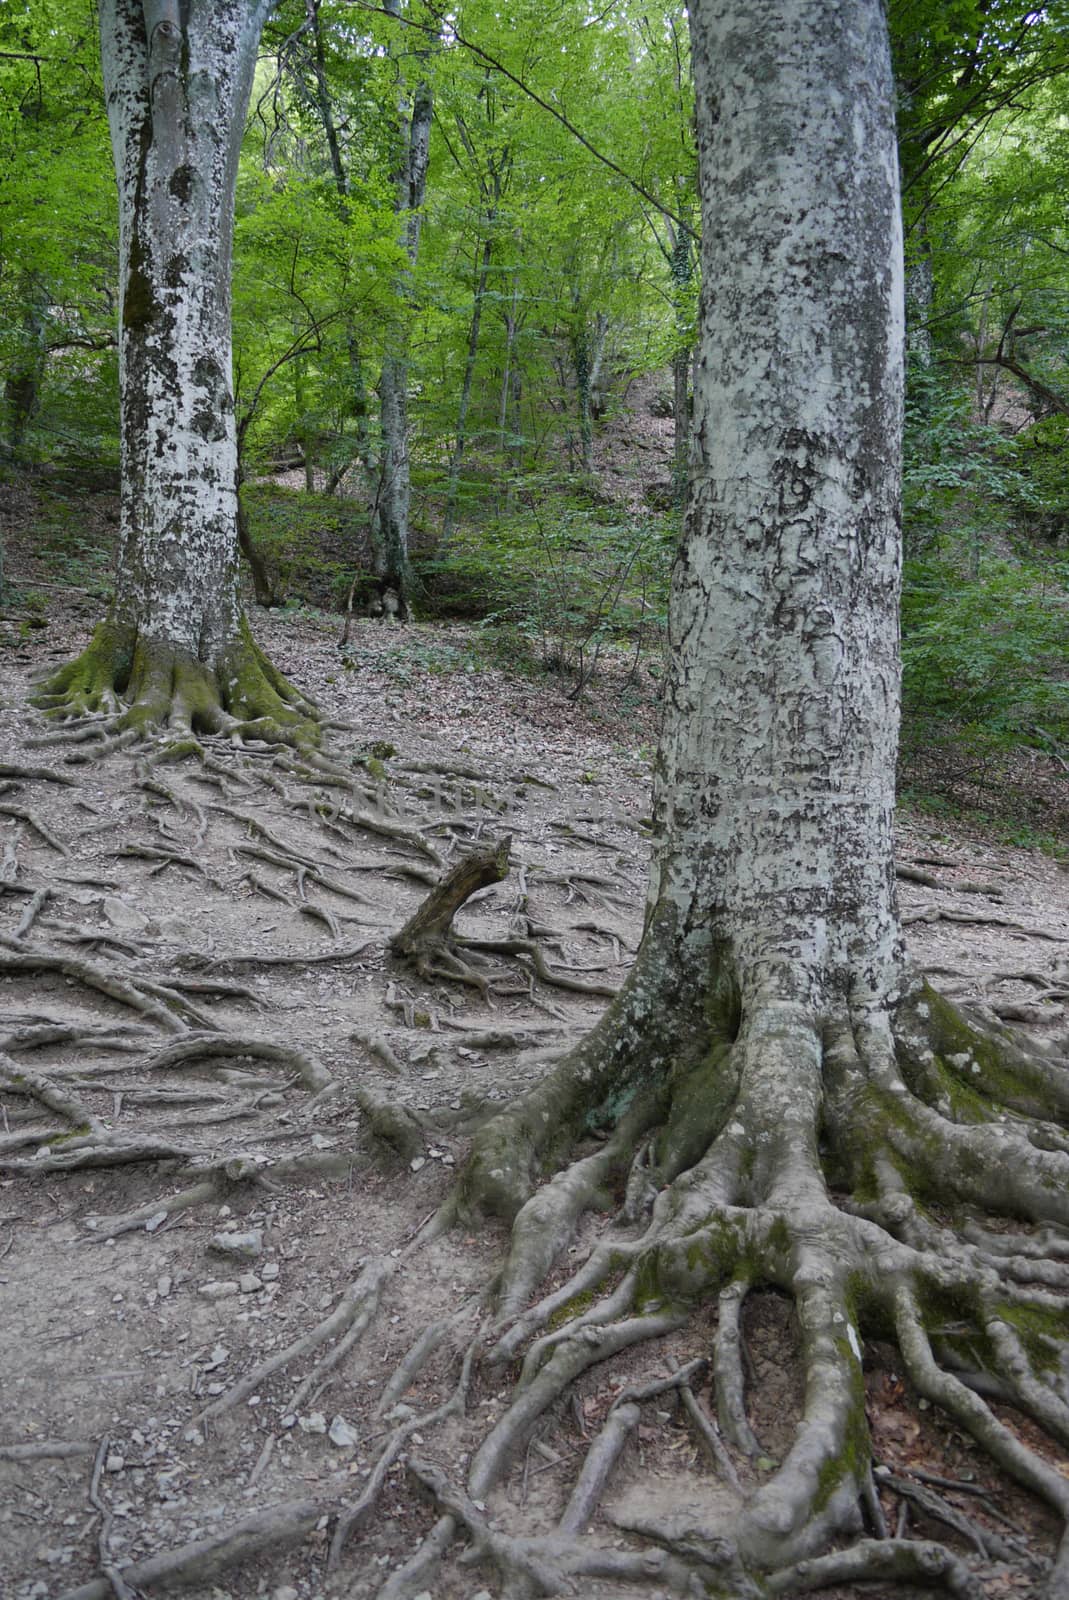 A steep slope with old, overgrown with massive roots, trees agai by Adamchuk